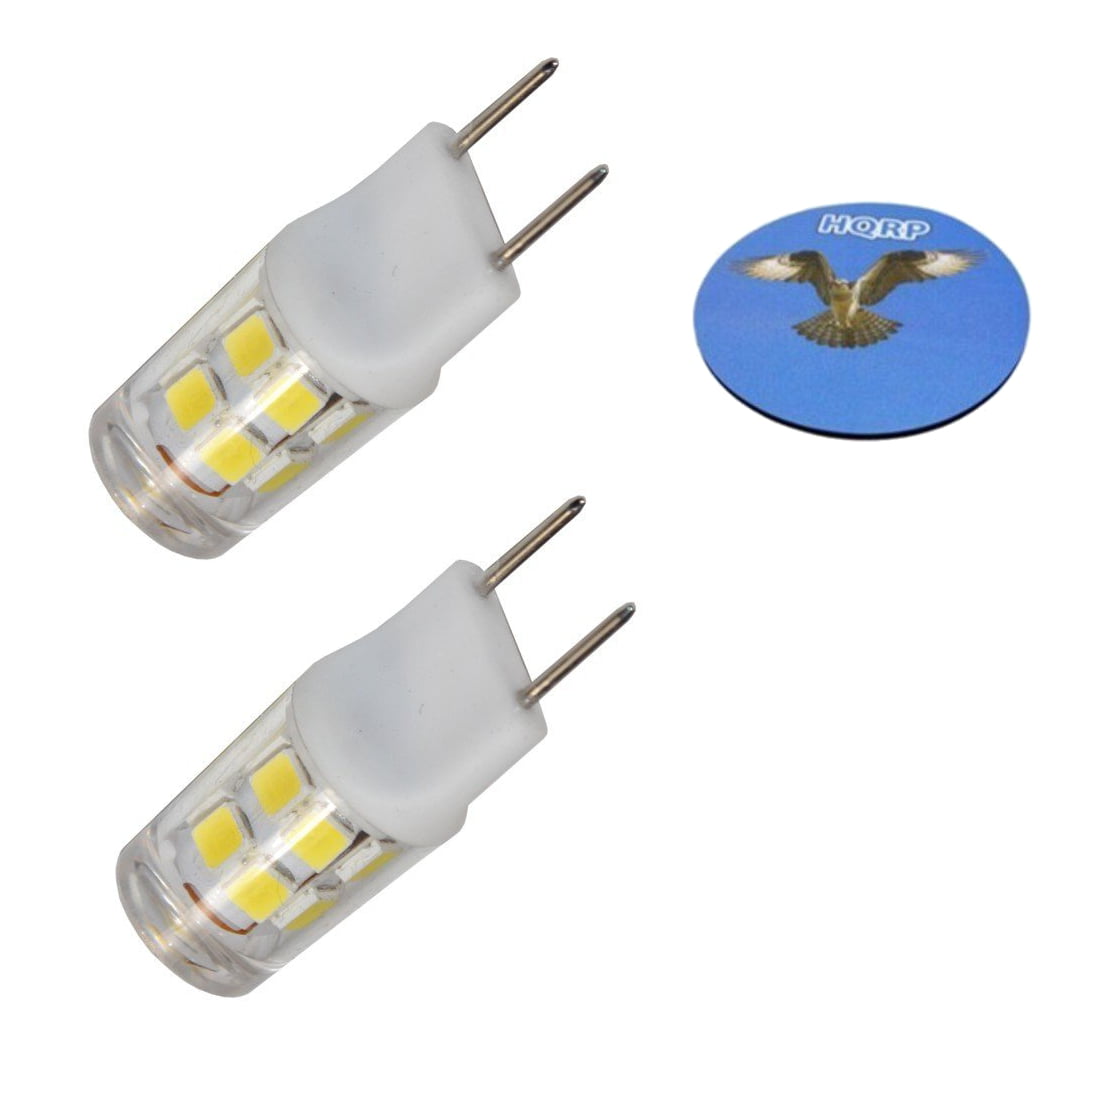 HQRP G8 Bi-Pin 17 LEDs Light Bulb SMD 2835 Cool White for GE Over The Stove Microwave Oven Plus Coaster